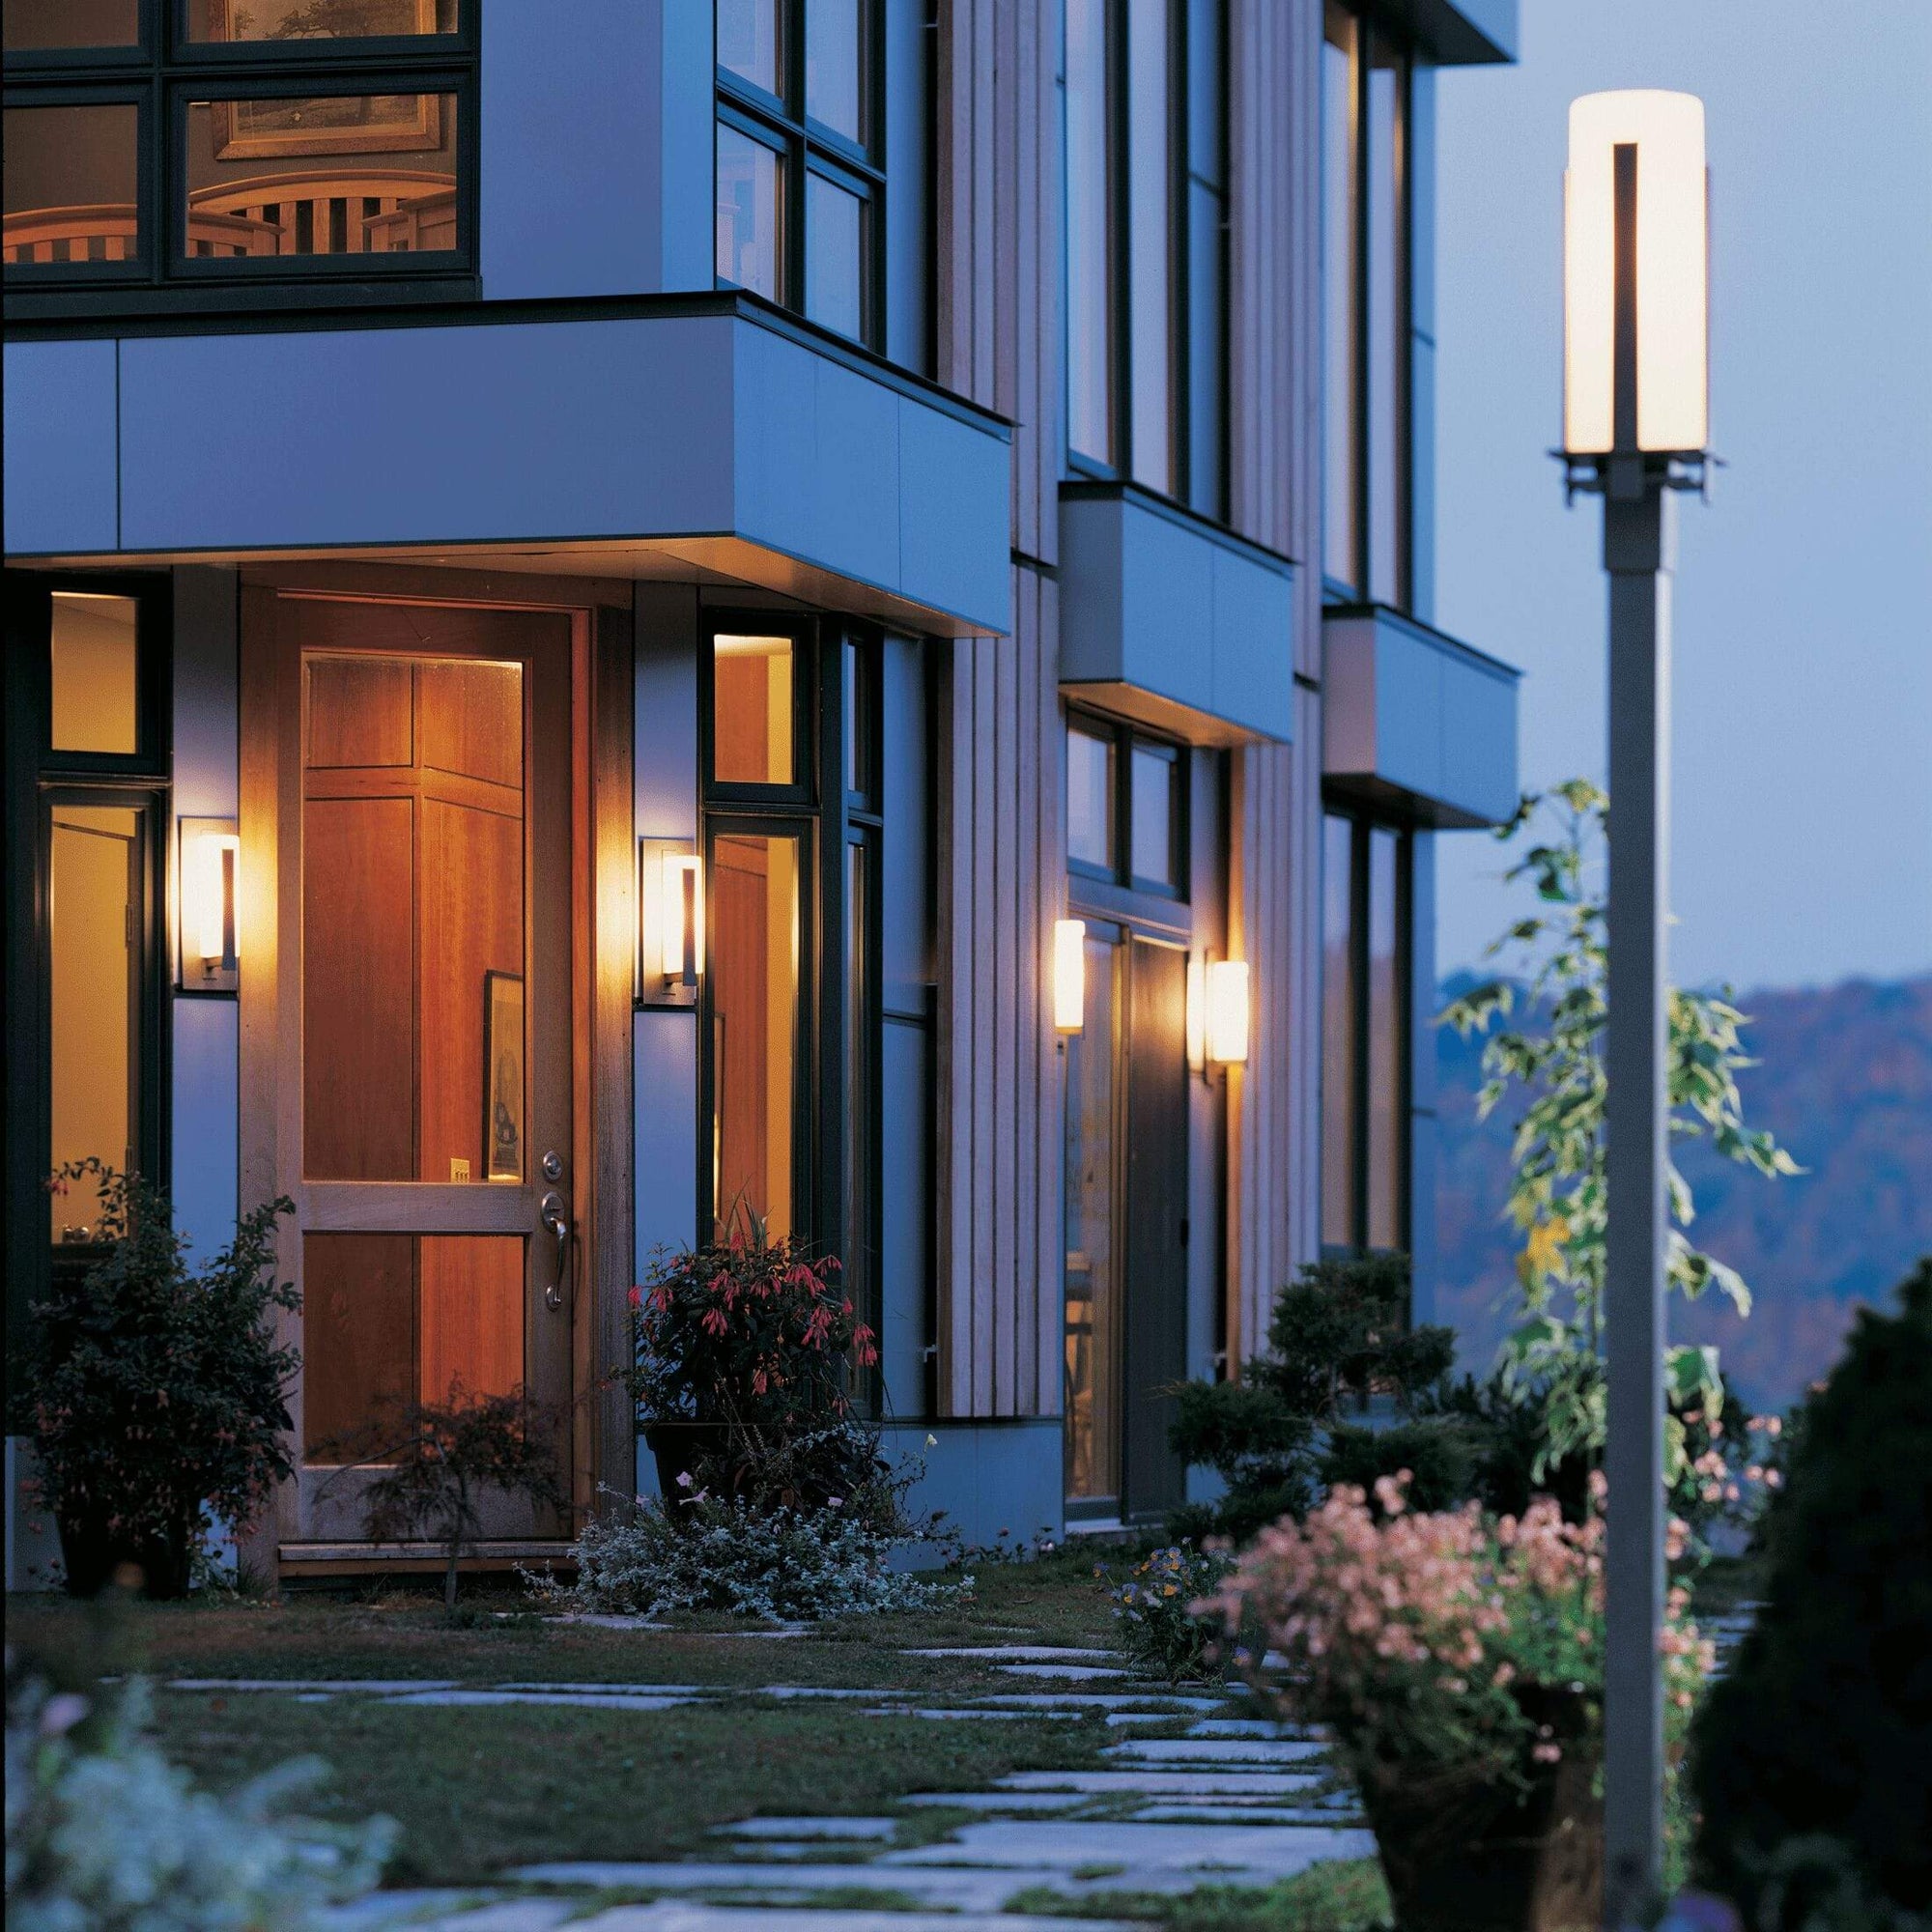 Exterior Wall Light Forged Vertical Bars Small Outdoor Sconce